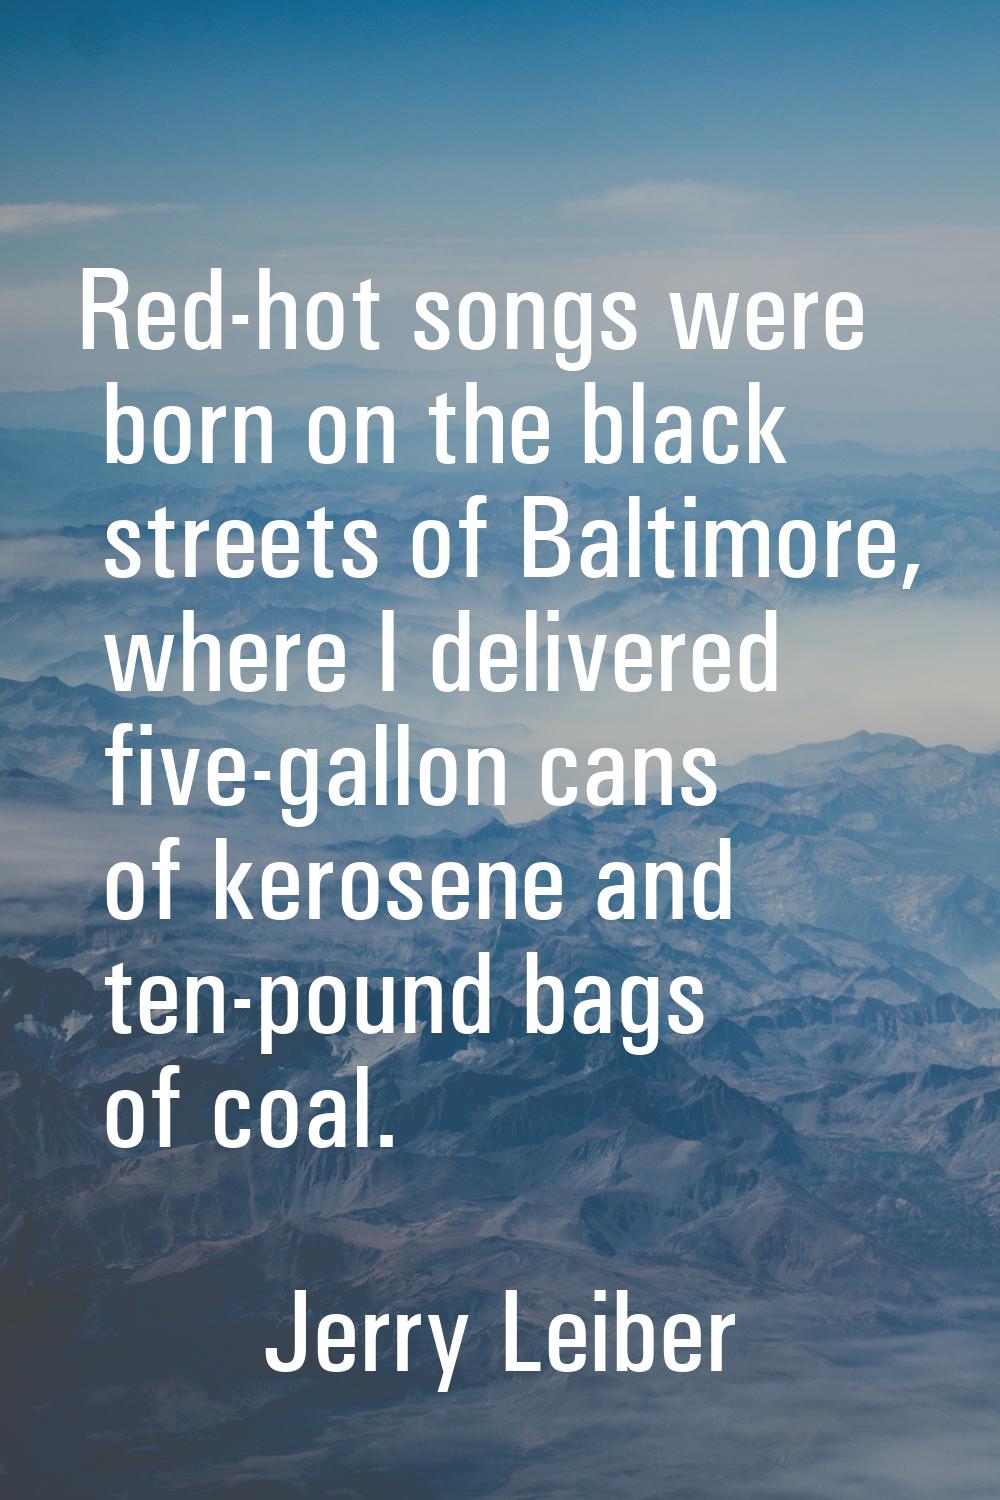 Red-hot songs were born on the black streets of Baltimore, where I delivered five-gallon cans of ke